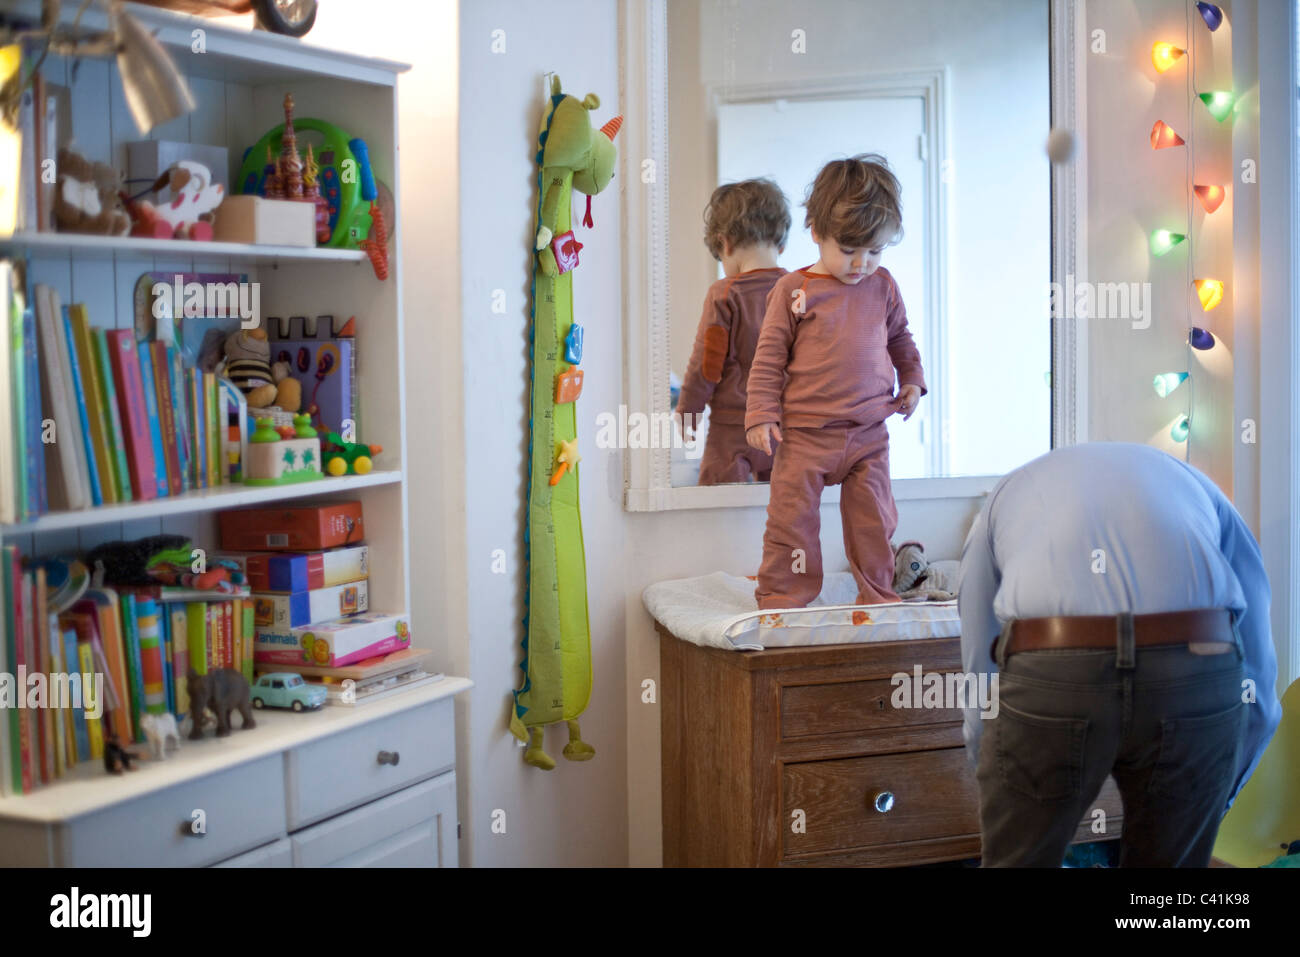 Toddler boy standing on top of changing table in nursery Stock Photo